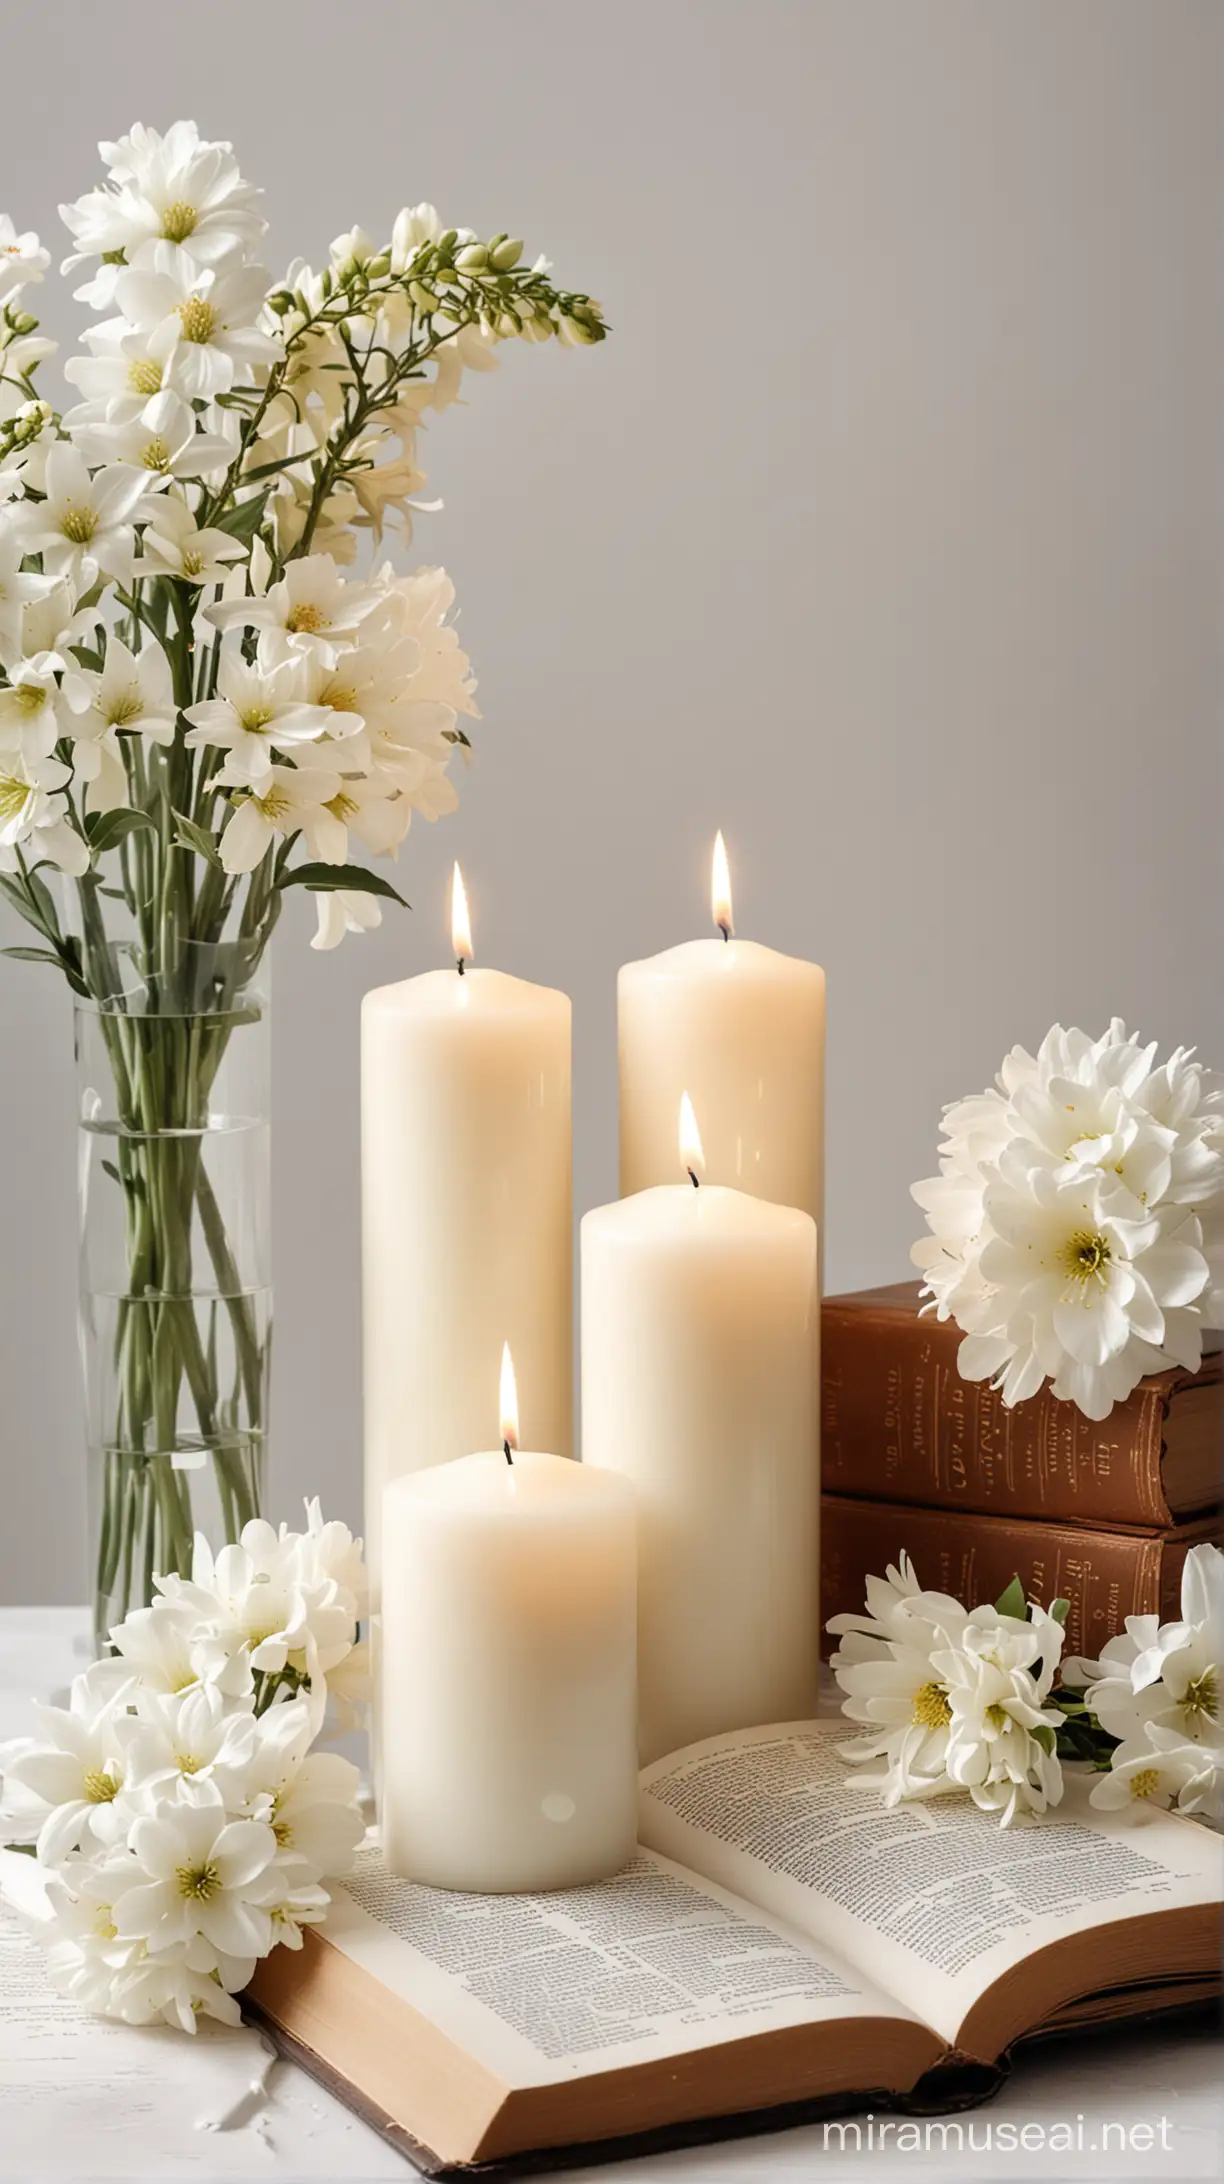 Fat candles of different heights, on white surface, with white flowers and open bible, soft white glow overlay
